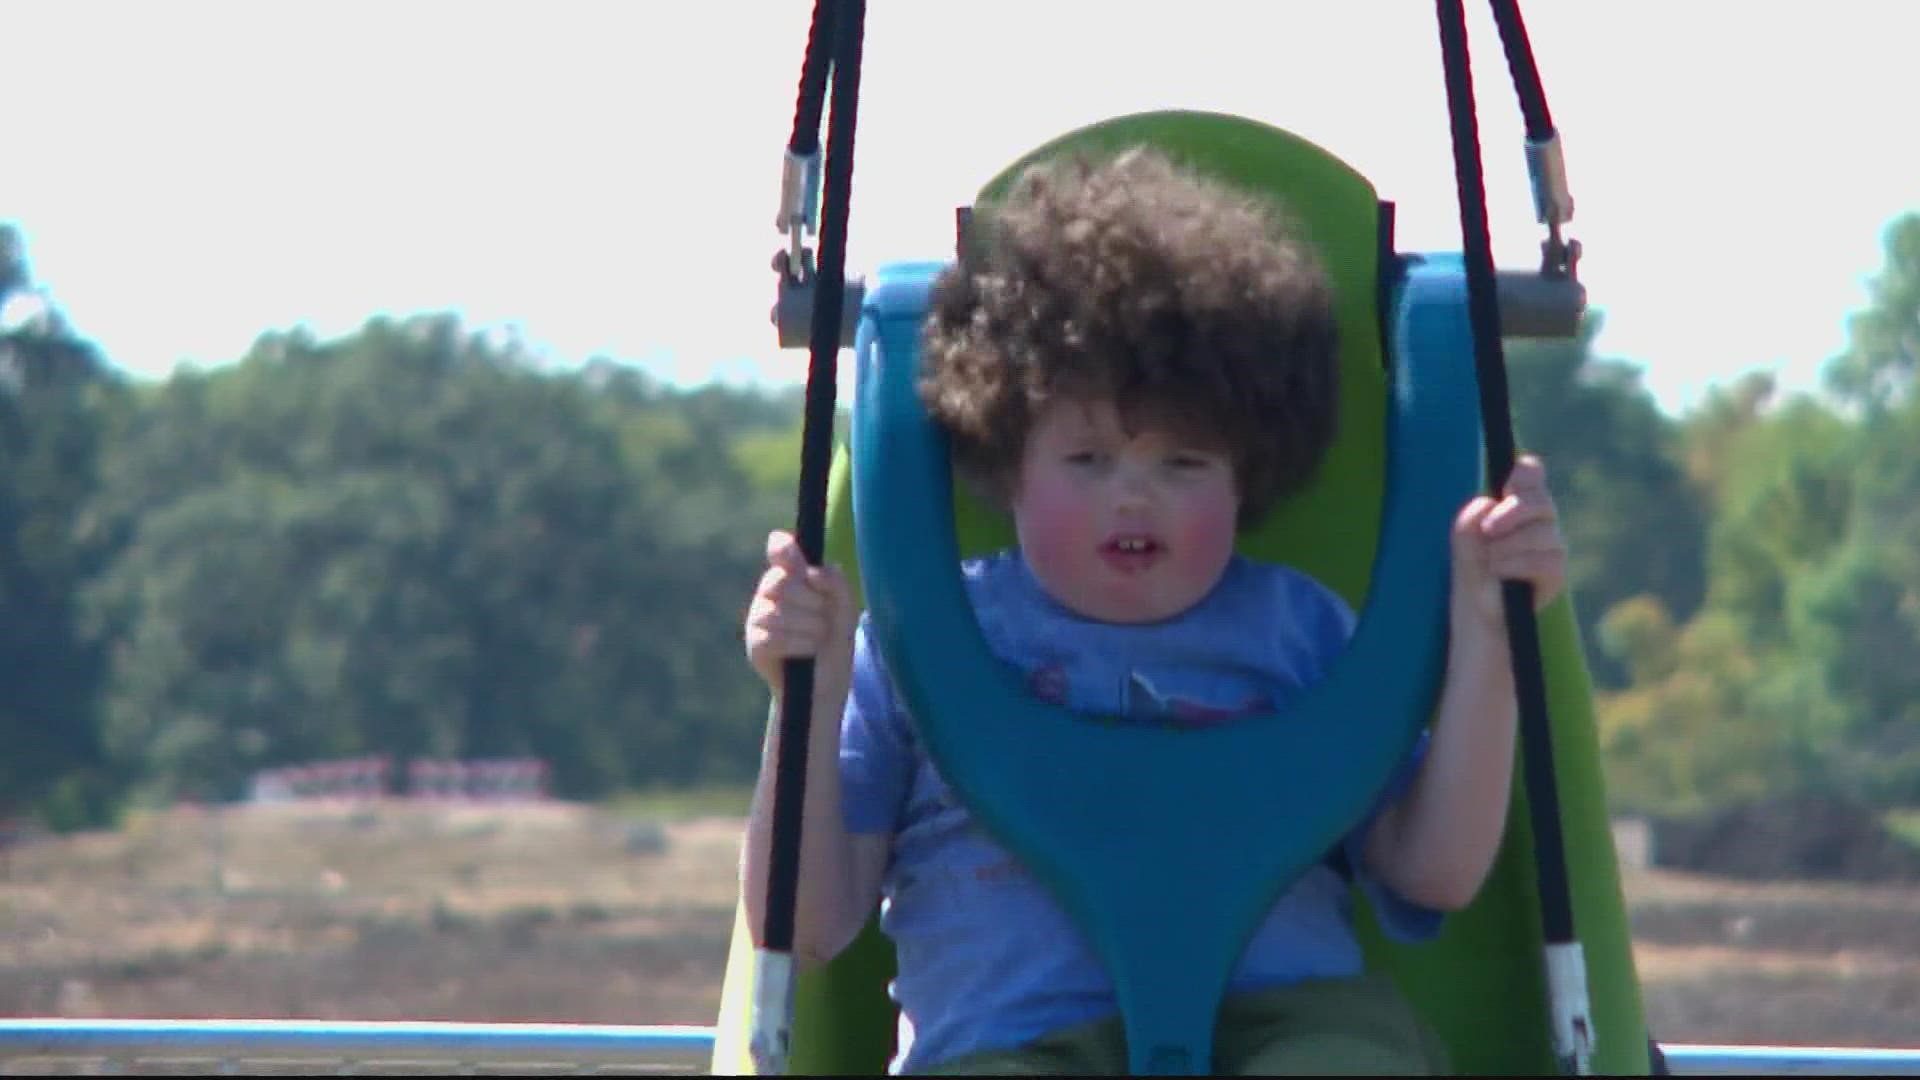 Many Make-A-Wish children wish for a one-time trip to somewhere special. But, Quinn Larson wished for a new playground in Waconia that he and kids like him could use